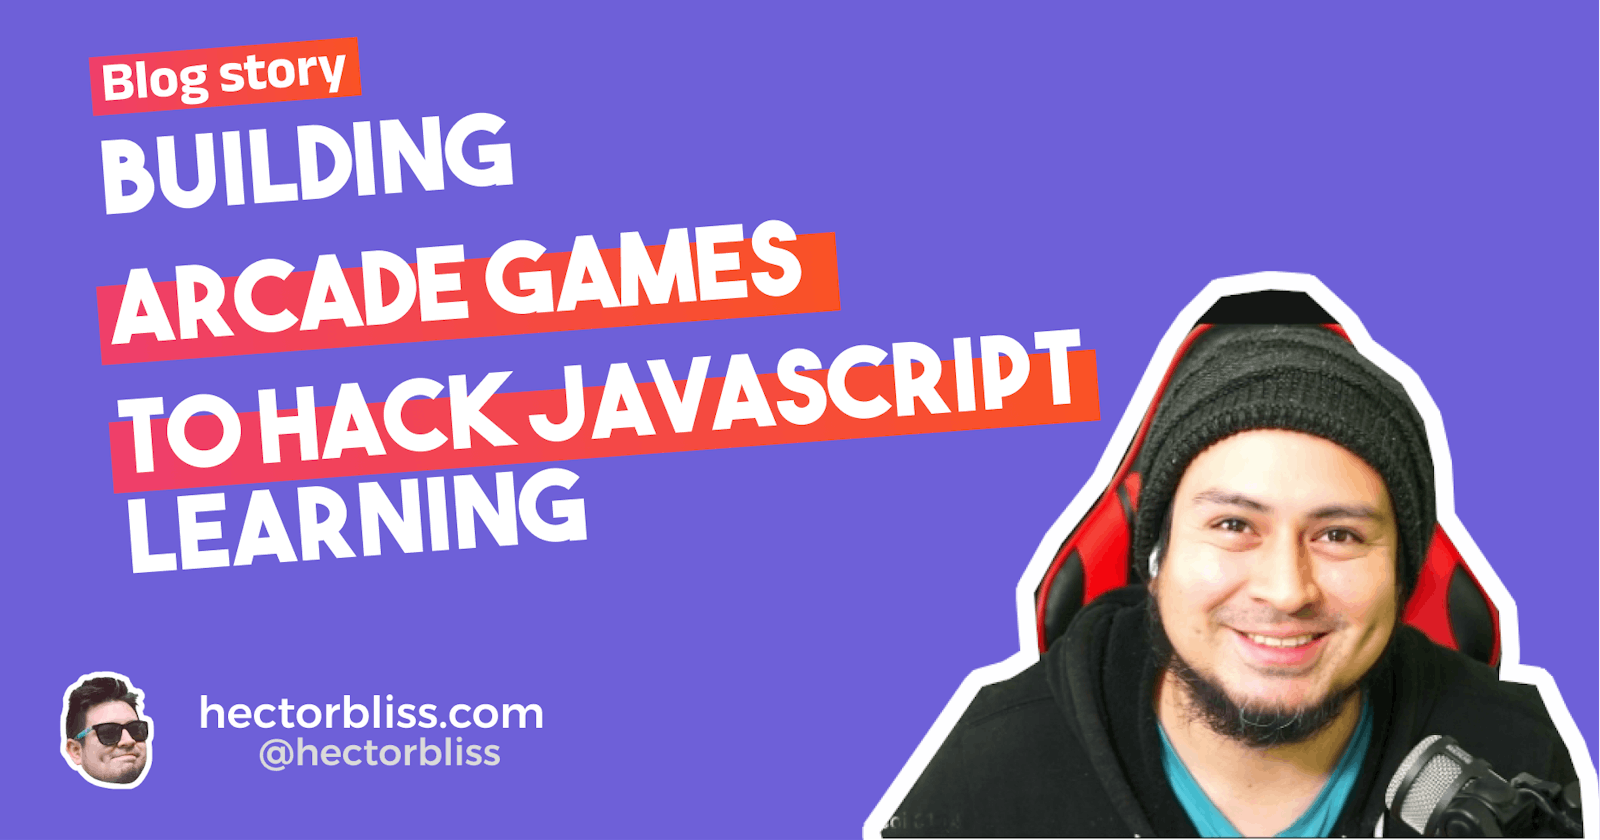 Building 
arcade games 
to hack JavaScript learning